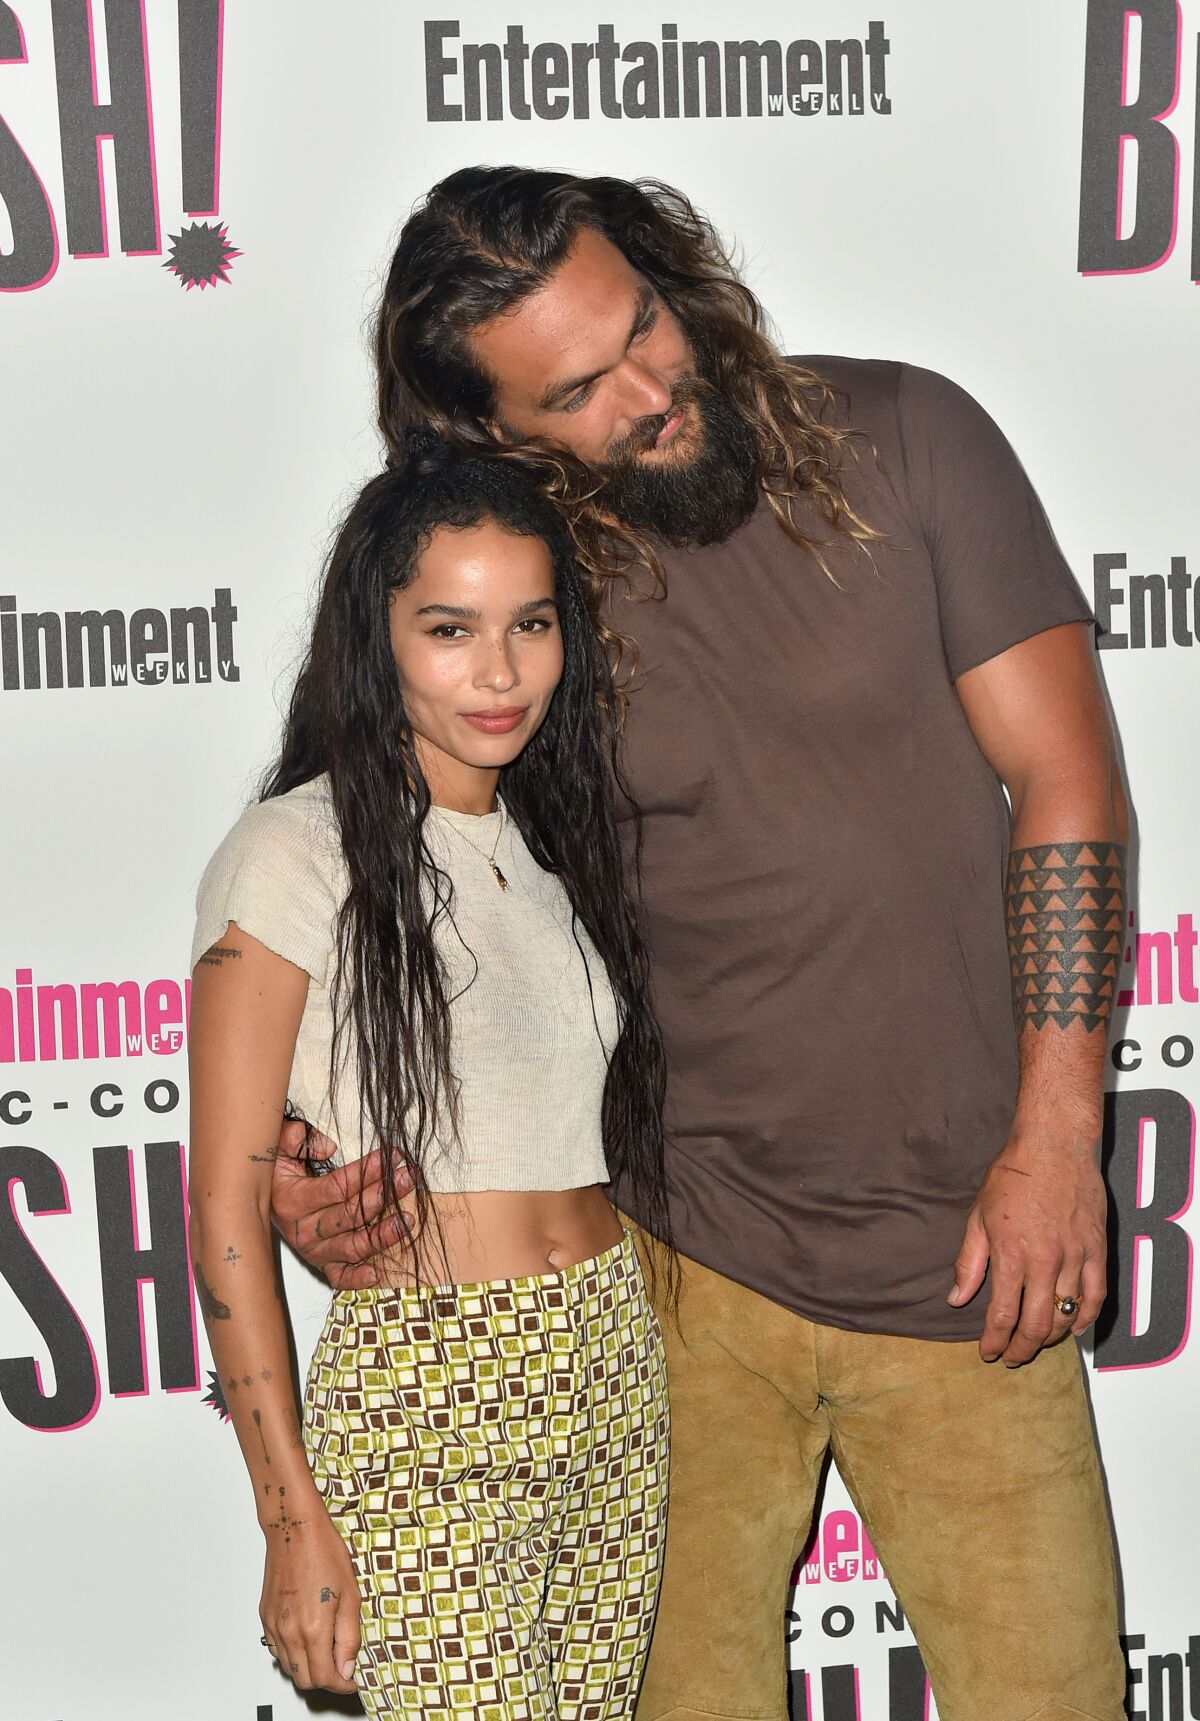 SAN DIEGO, CA - JULY 21: (L-R) Zoe Kravitz and Jason Momoa attends Entertainment Weekly's Comic-Con Bash held at FLOAT, Hard Rock Hotel San Diego on July 21, 2018 in San Diego, California sponsored by HBO (Photo by Jerod Harris/Getty Images)